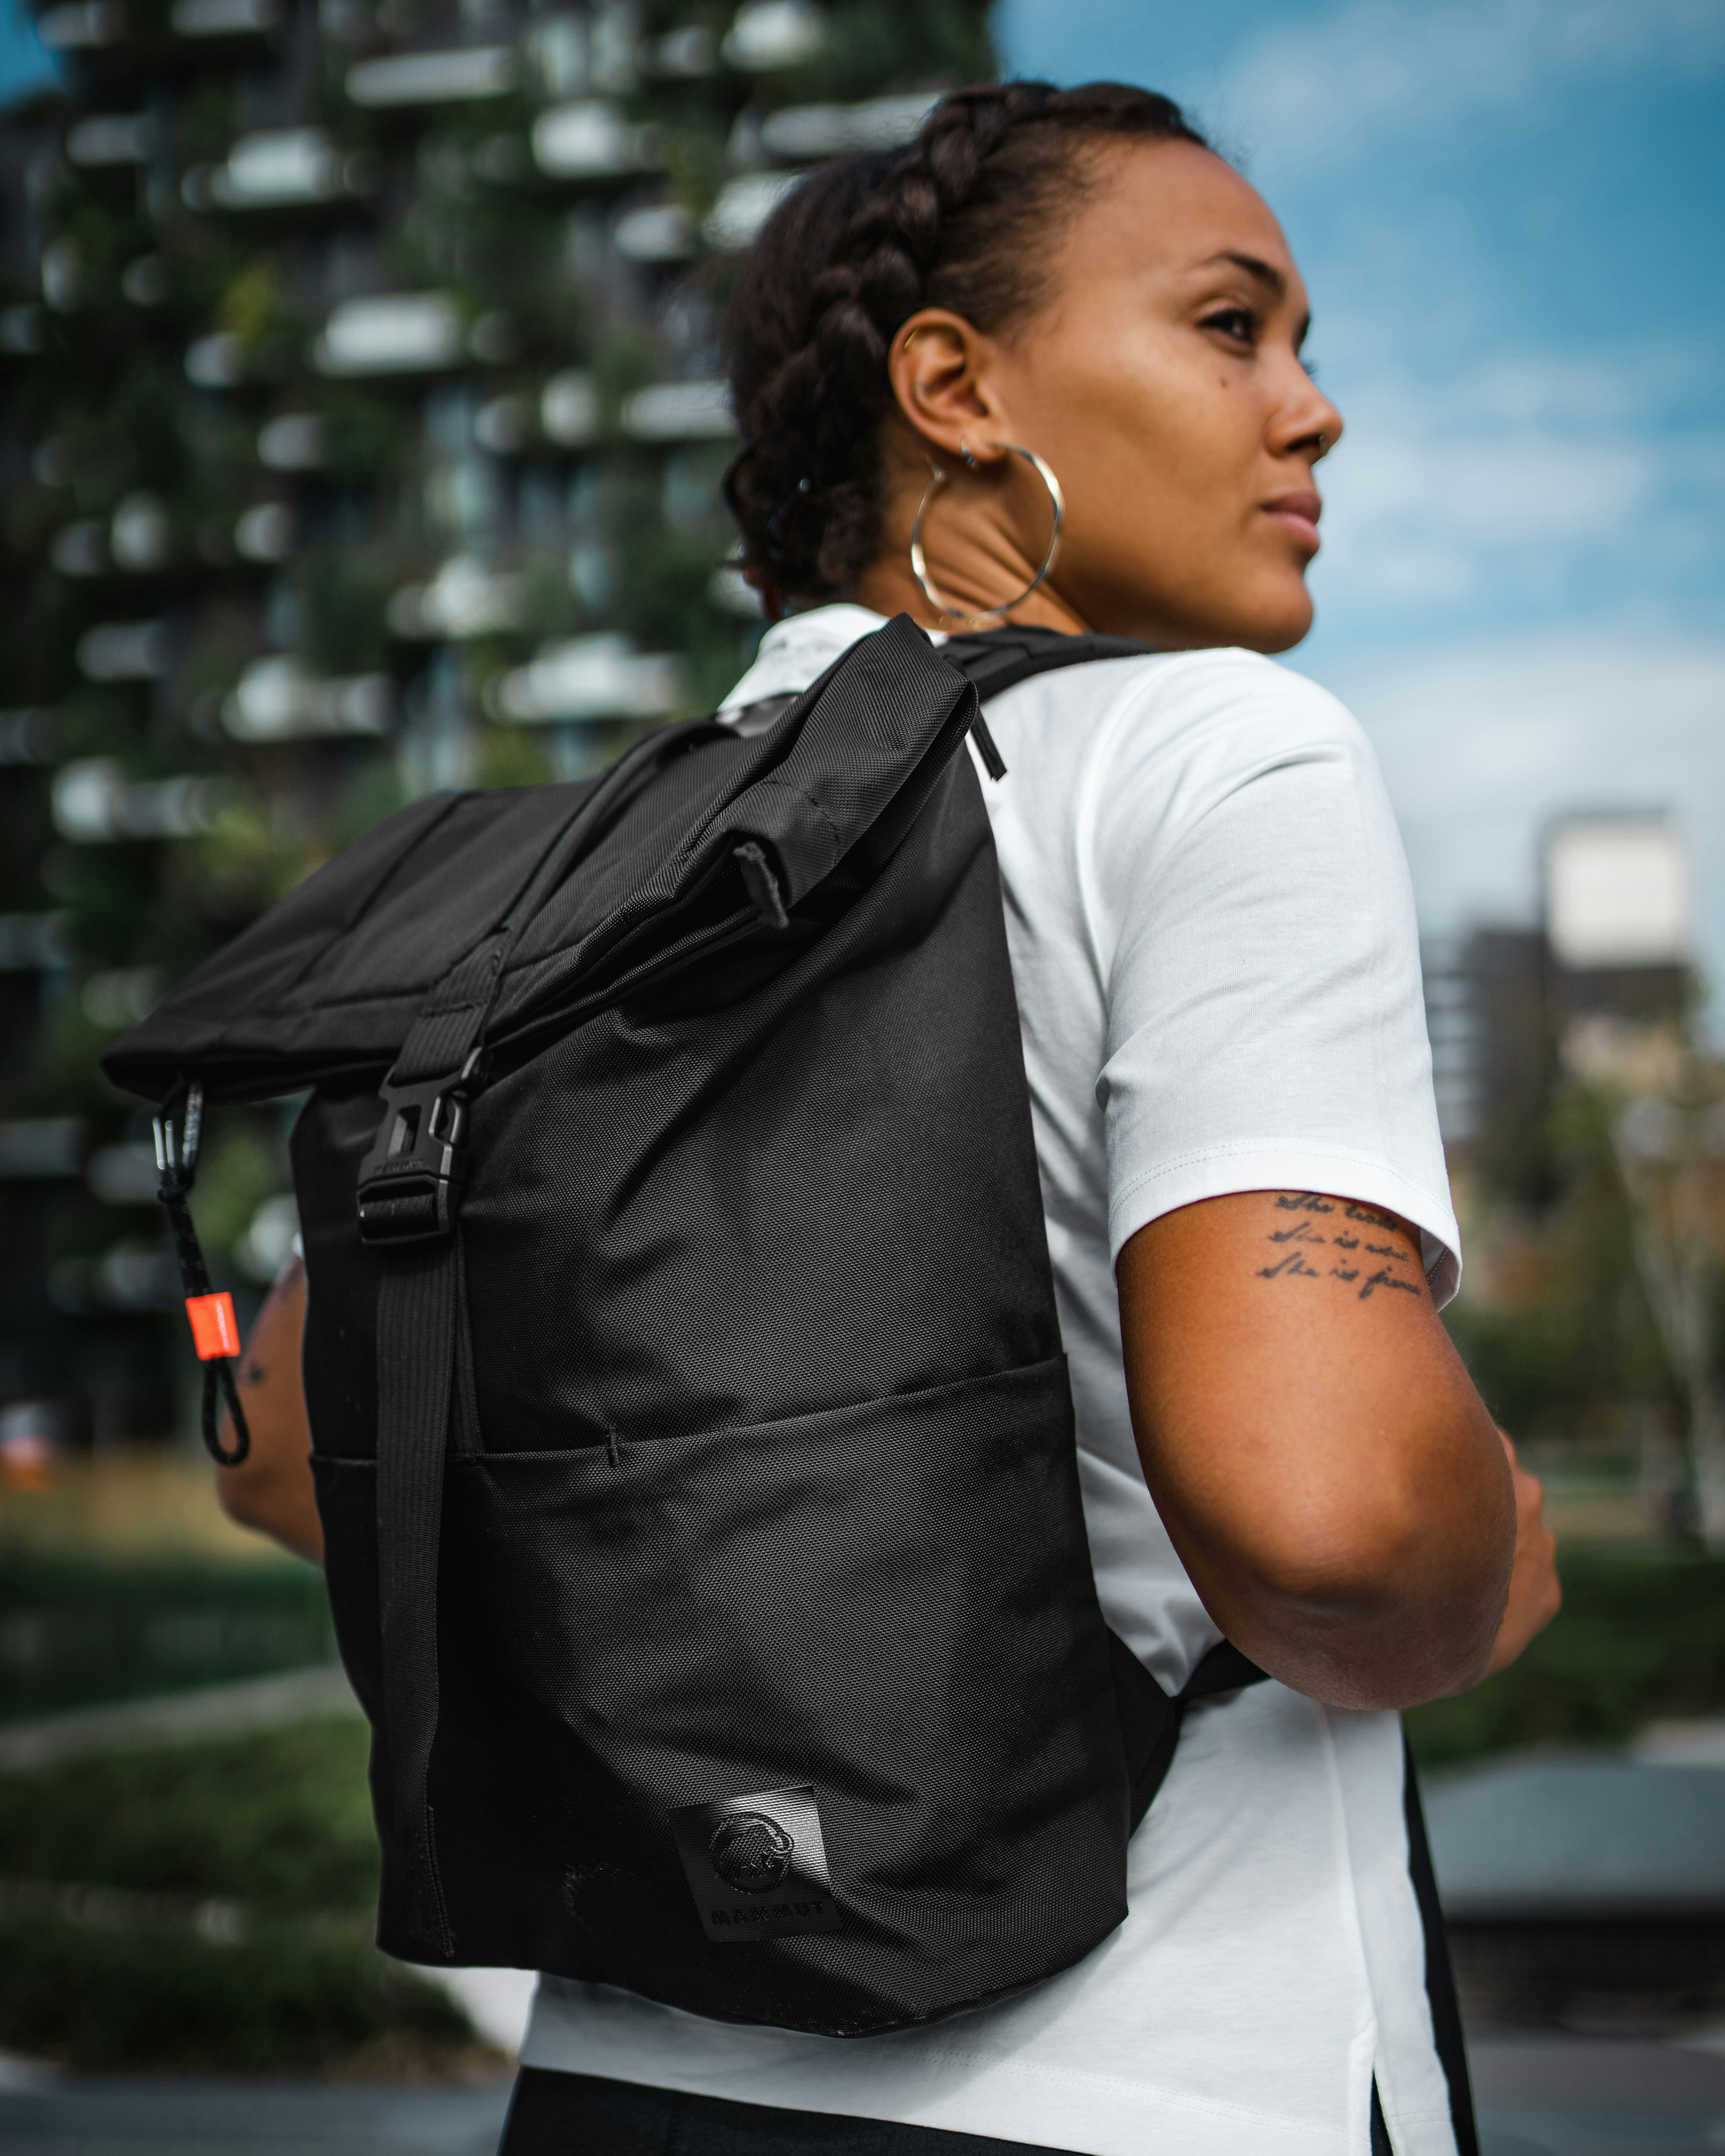 Woman with backpack